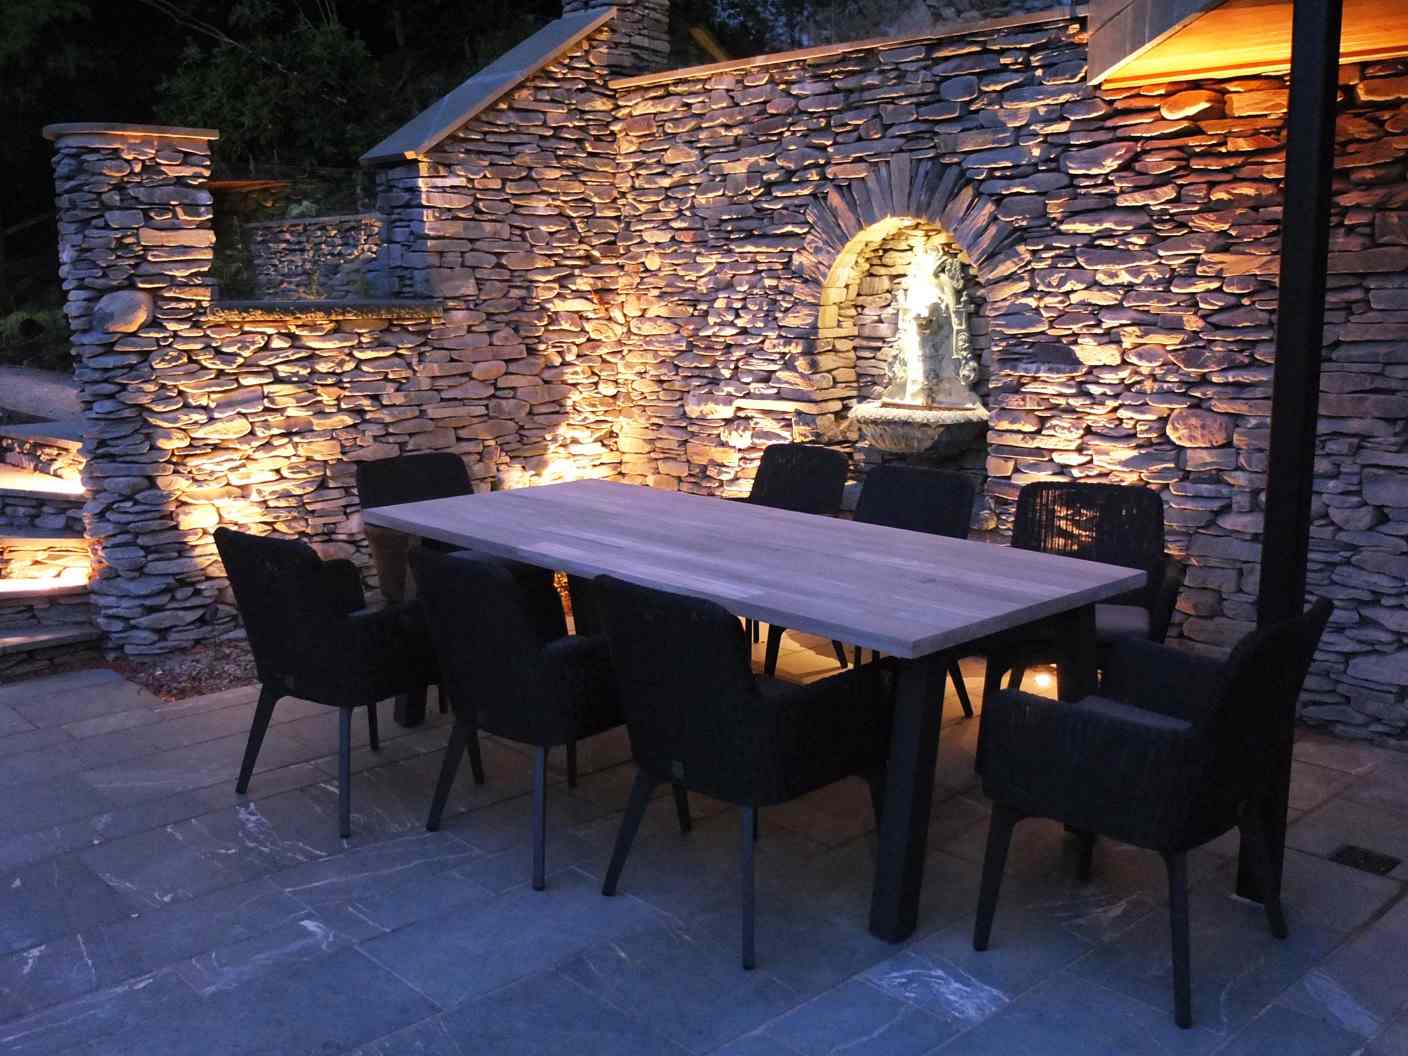 Spring Cottage Grounds - Outdoor Dining by Night